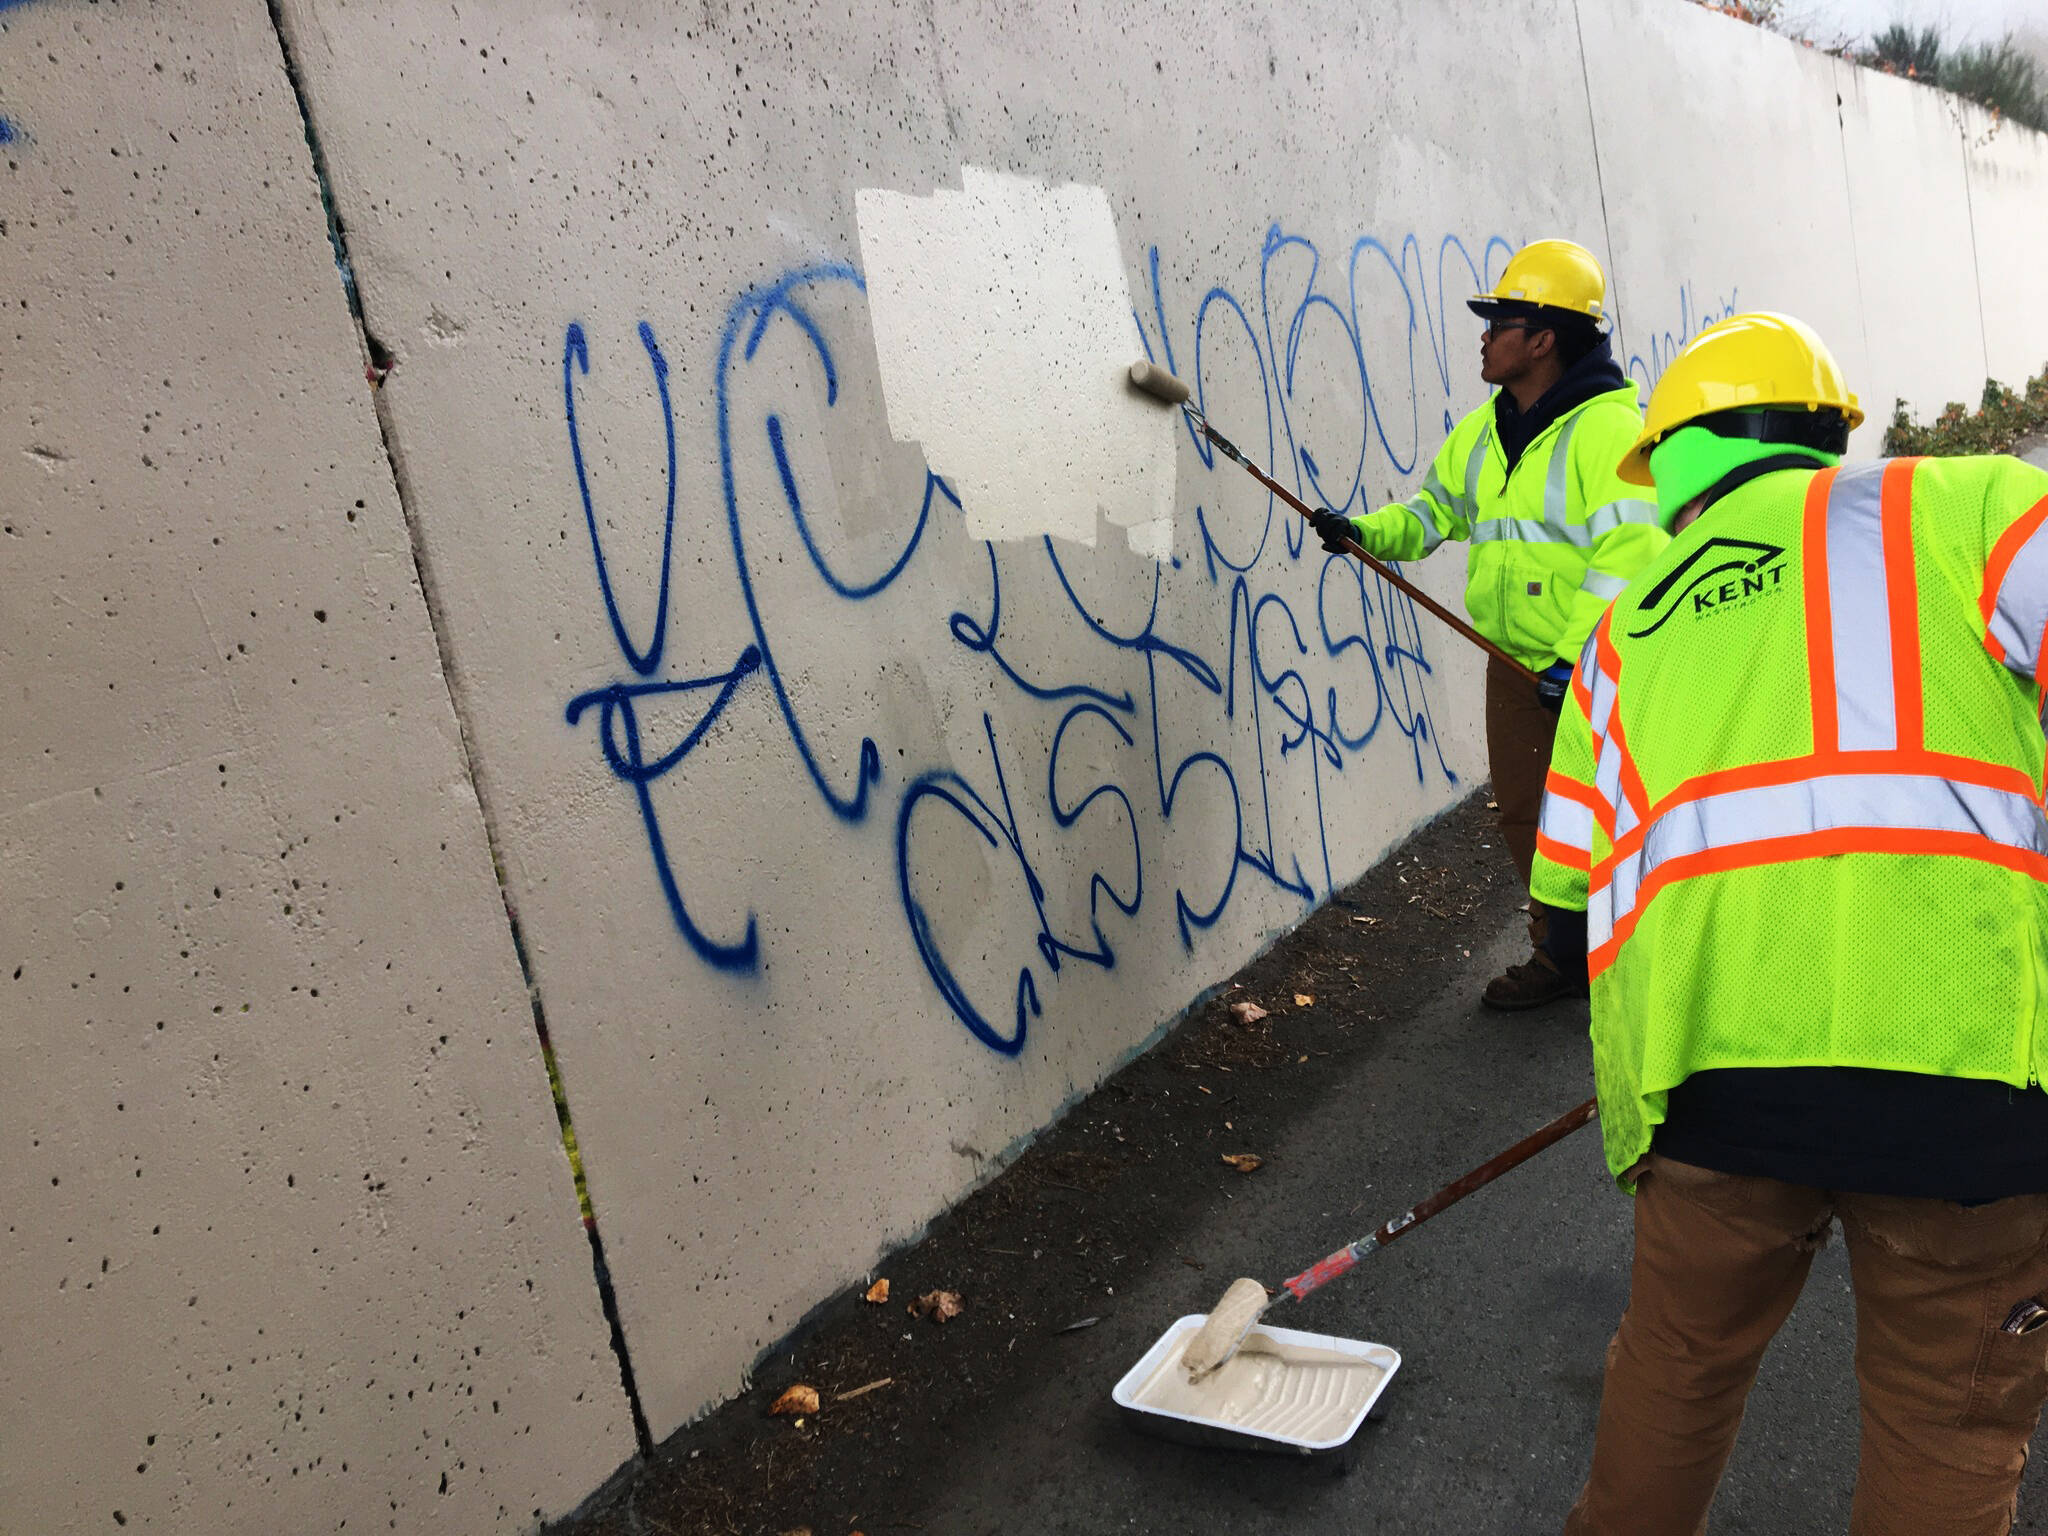 Kent city crews paint over graffiti earlier this year. COURTESY PHOTO, City of Kent